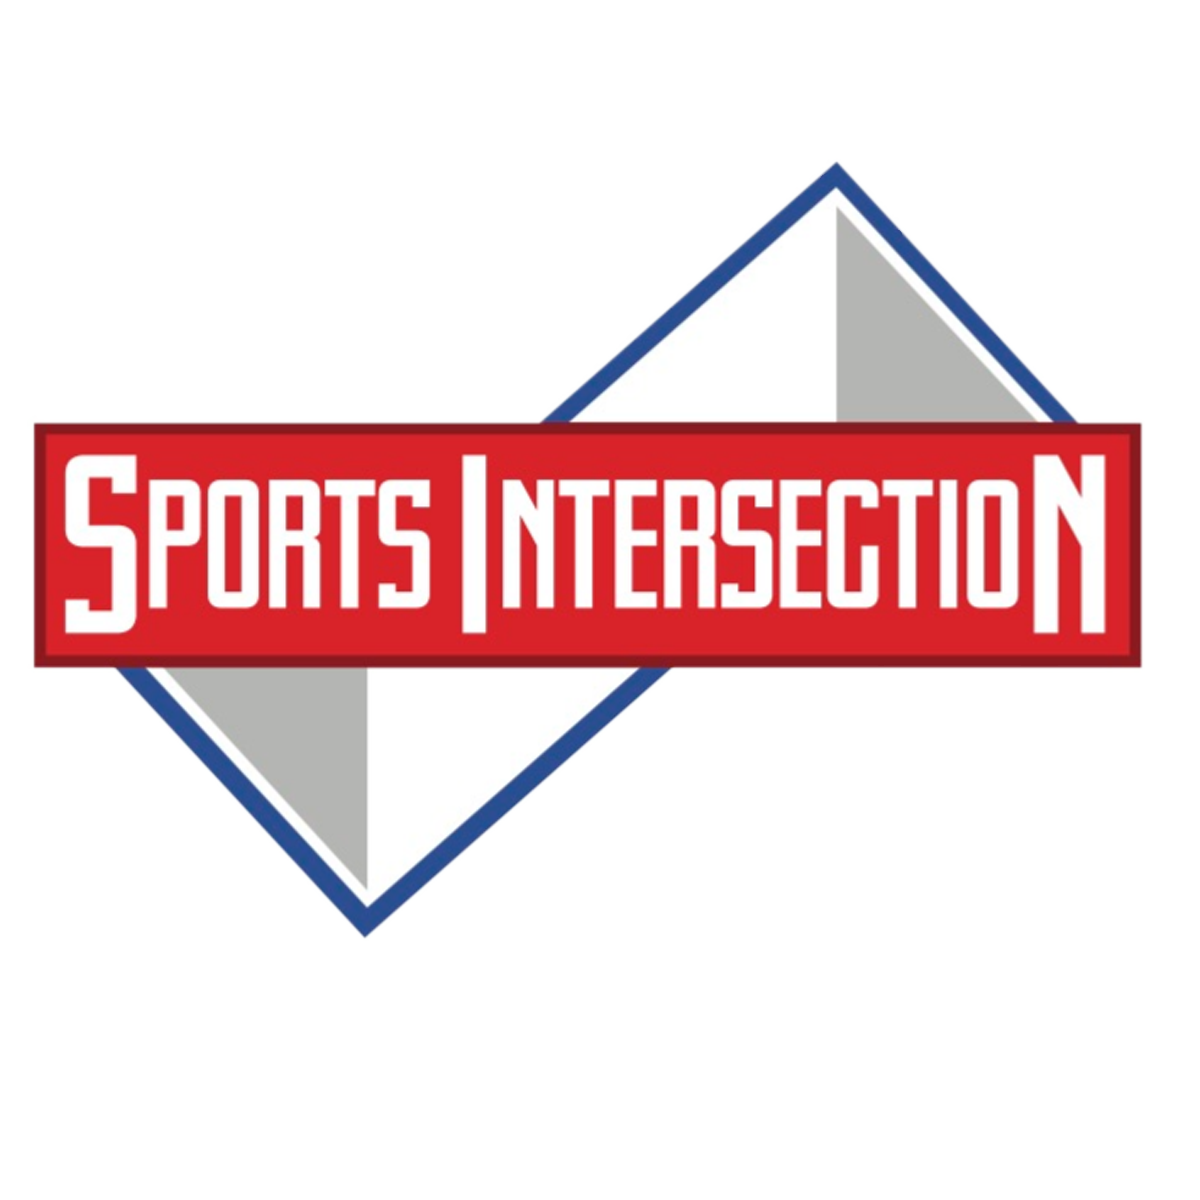 SPORTS INTERSECTION BASKETBALL ACADEMY